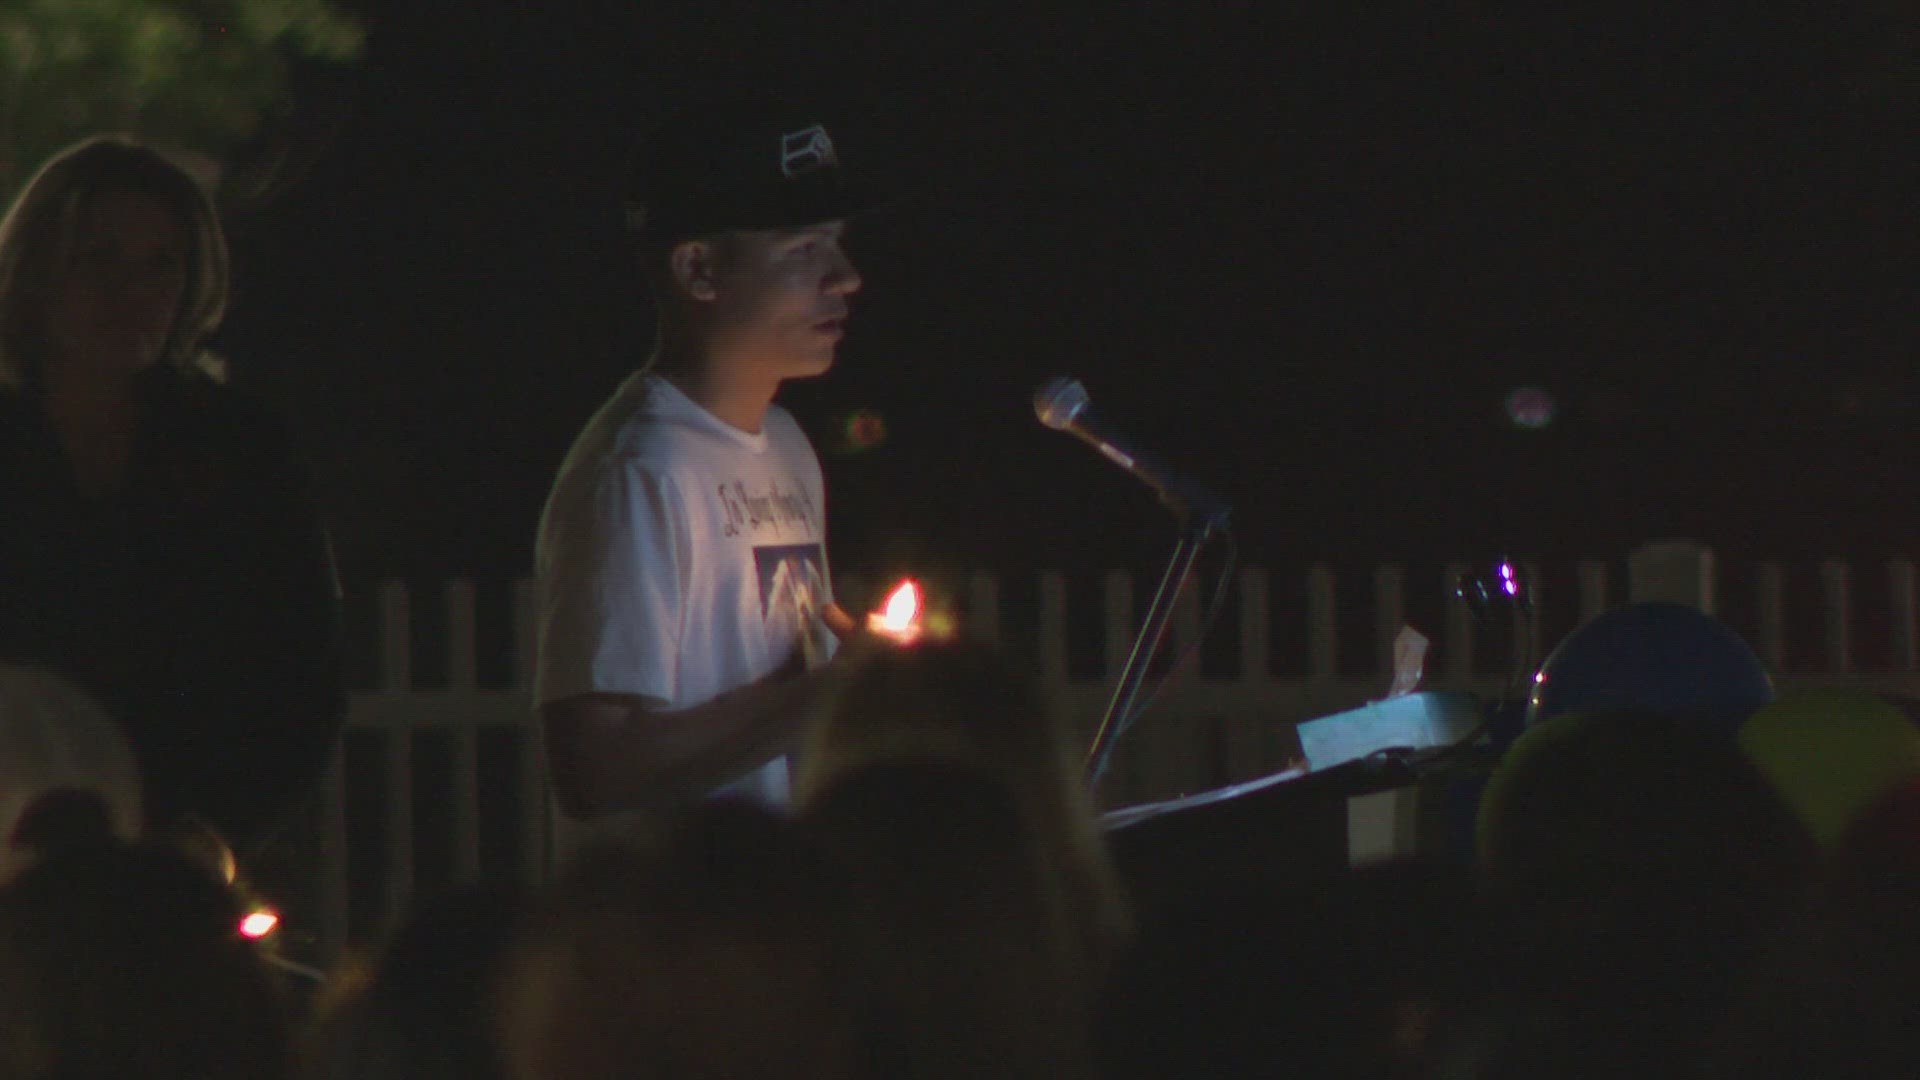 Hundreds of community members gathered at Combs High School Thursday night for a candlelight vigil to honor the life of Preston Lord.